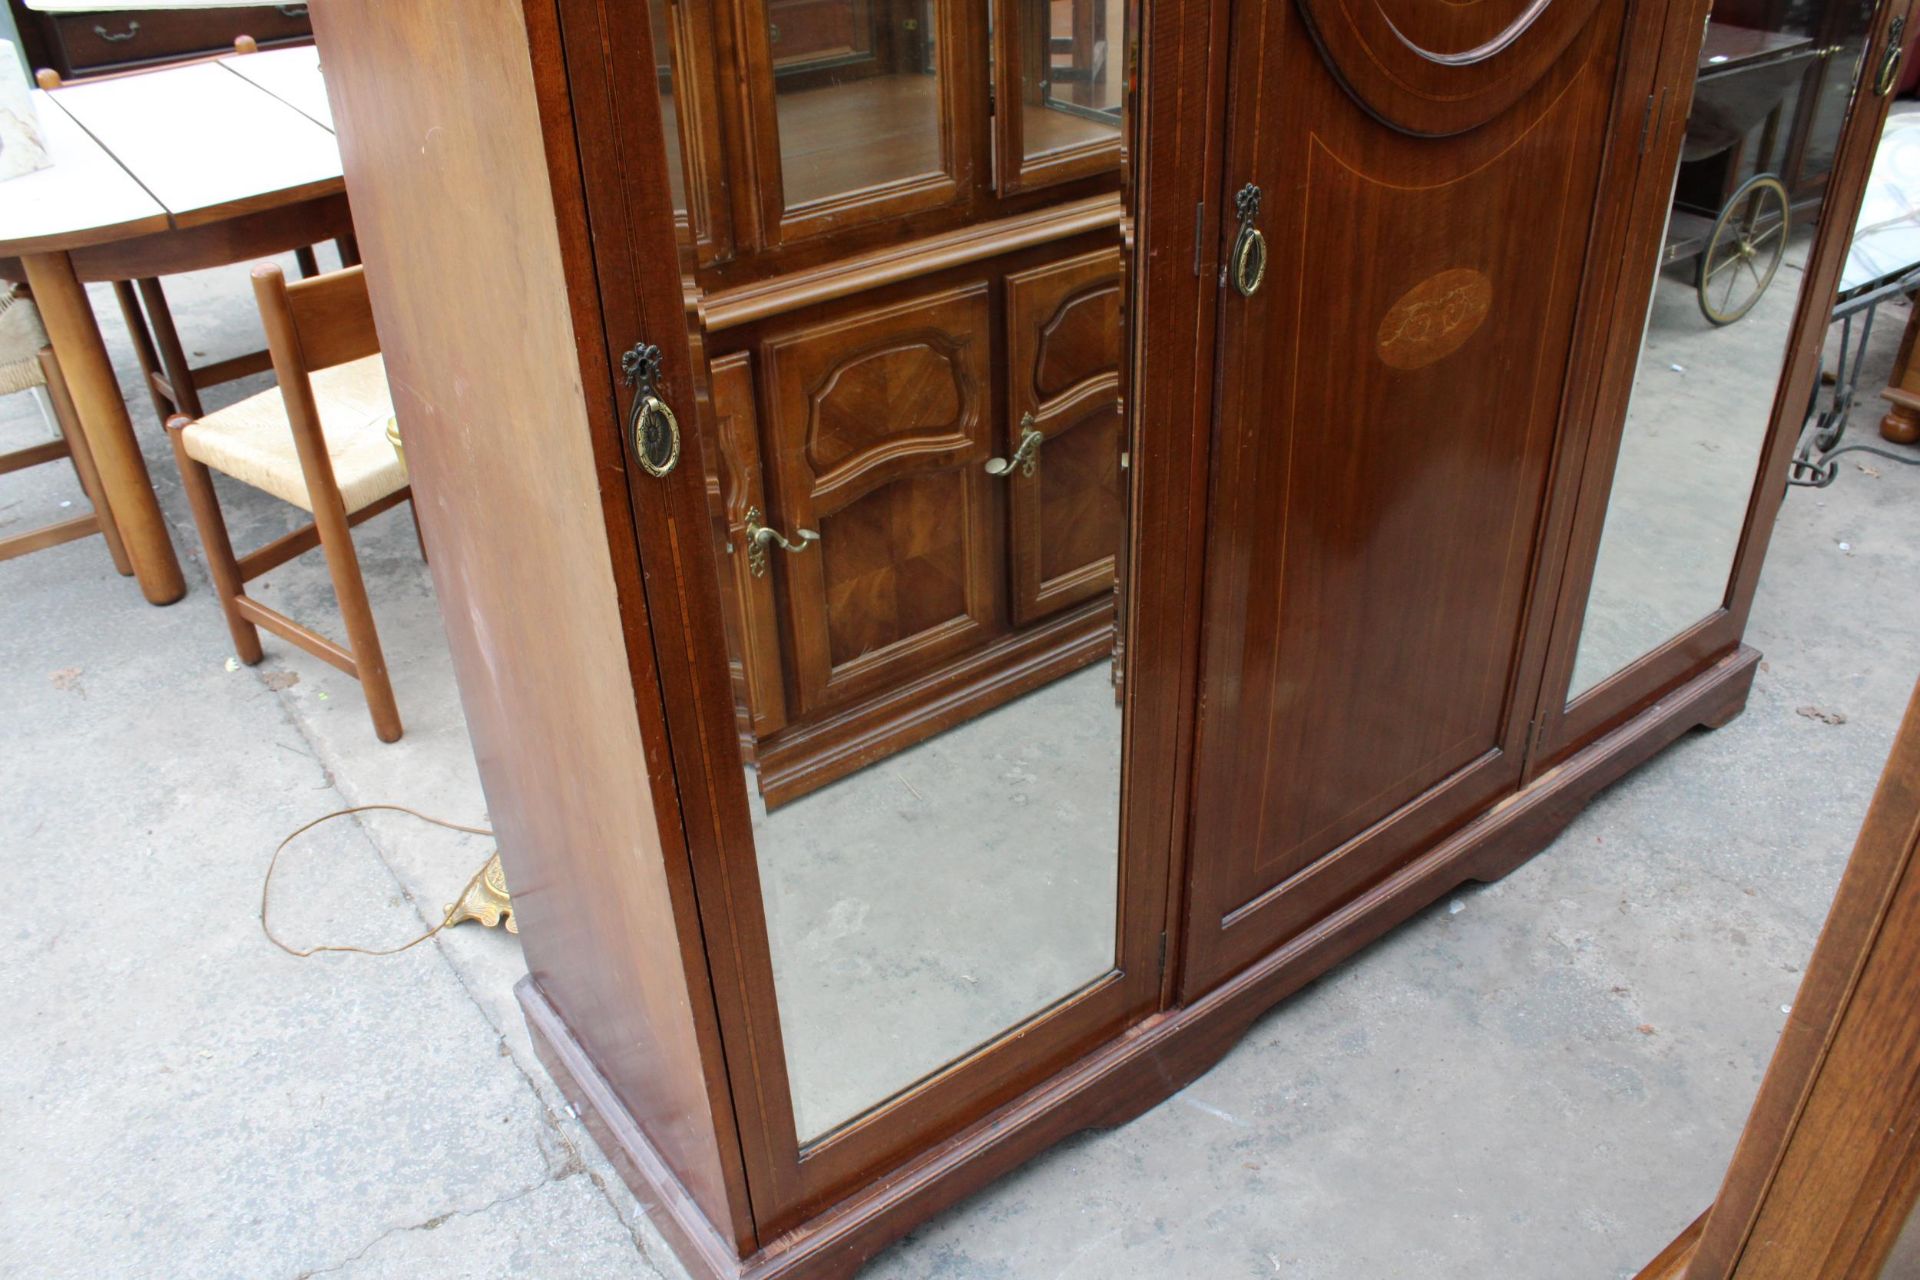 AN EDWARDIAN MAHOGANY AND INLAID DOUBLE MIRROR DOOR WARDROBE 74" WIDE - Image 3 of 9